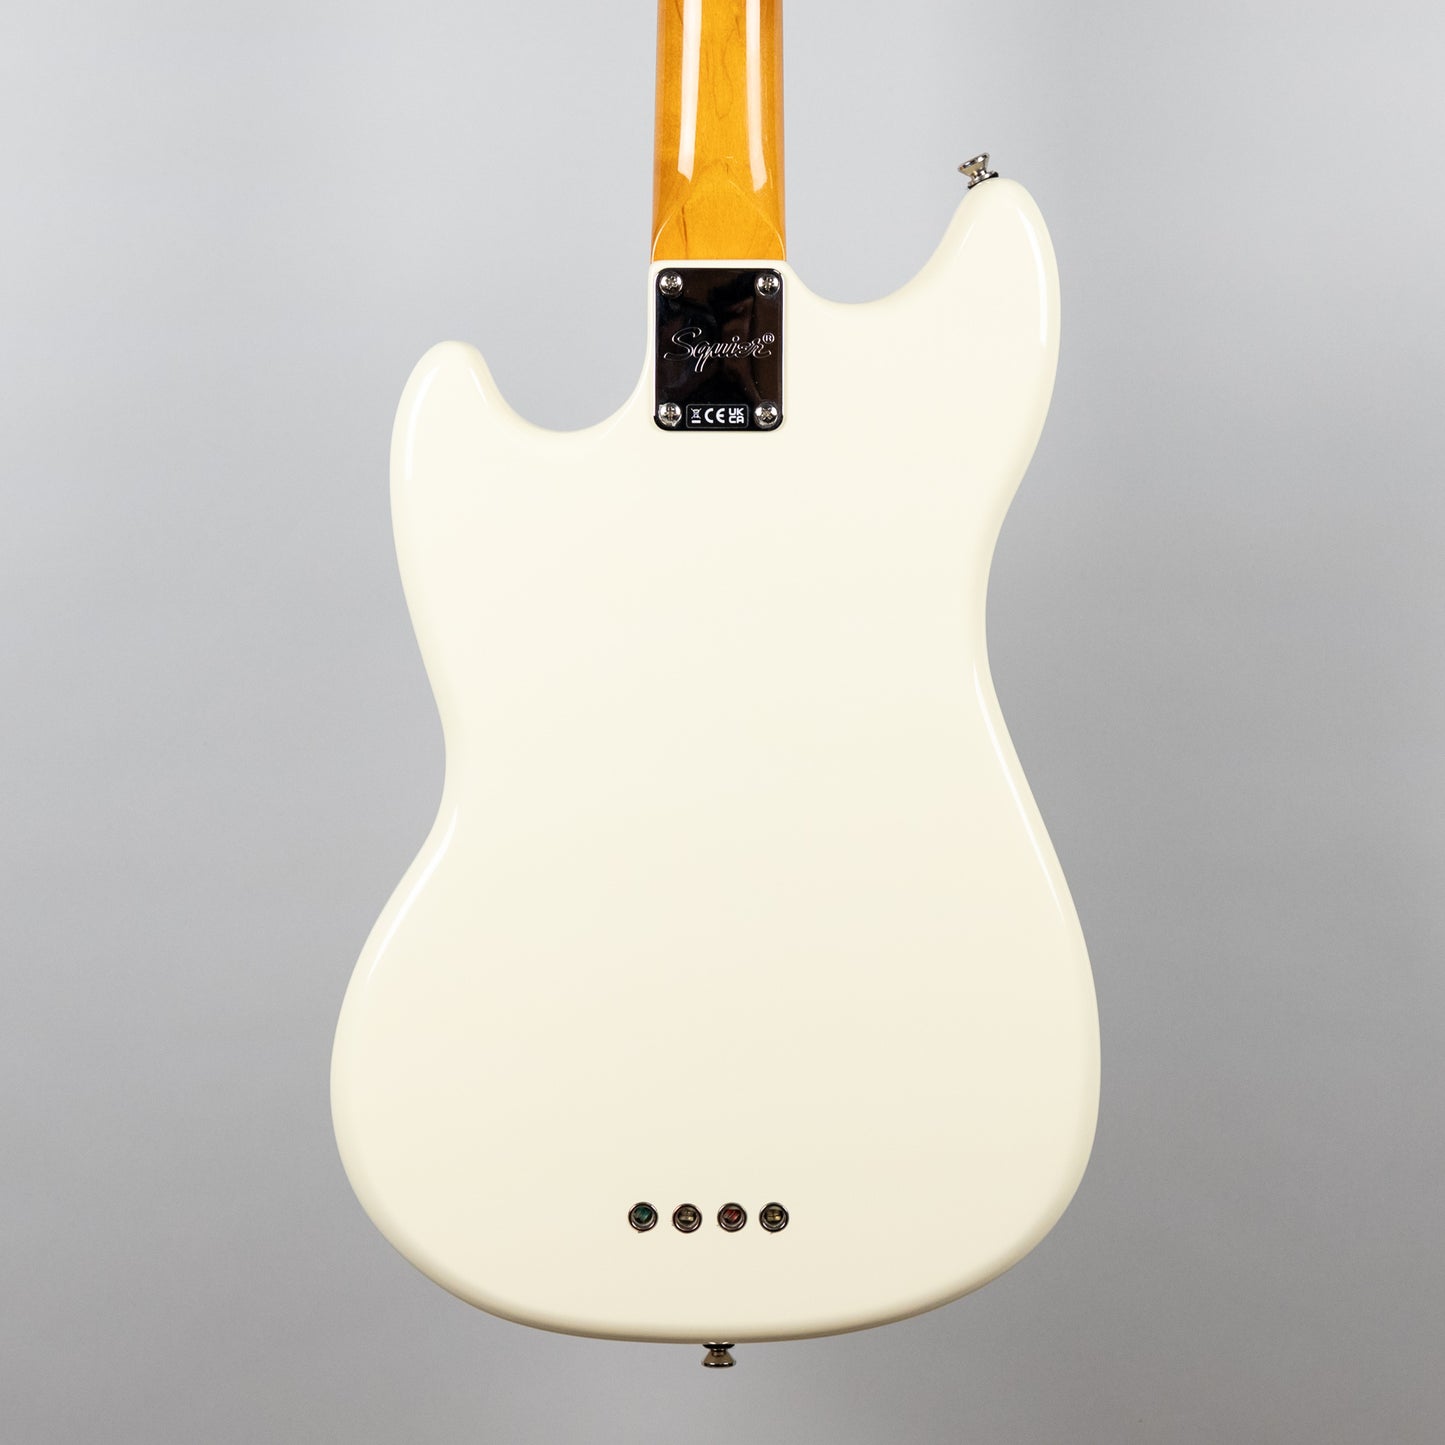 Squier Classic Vibe '60s Mustang Bass in Olympic White